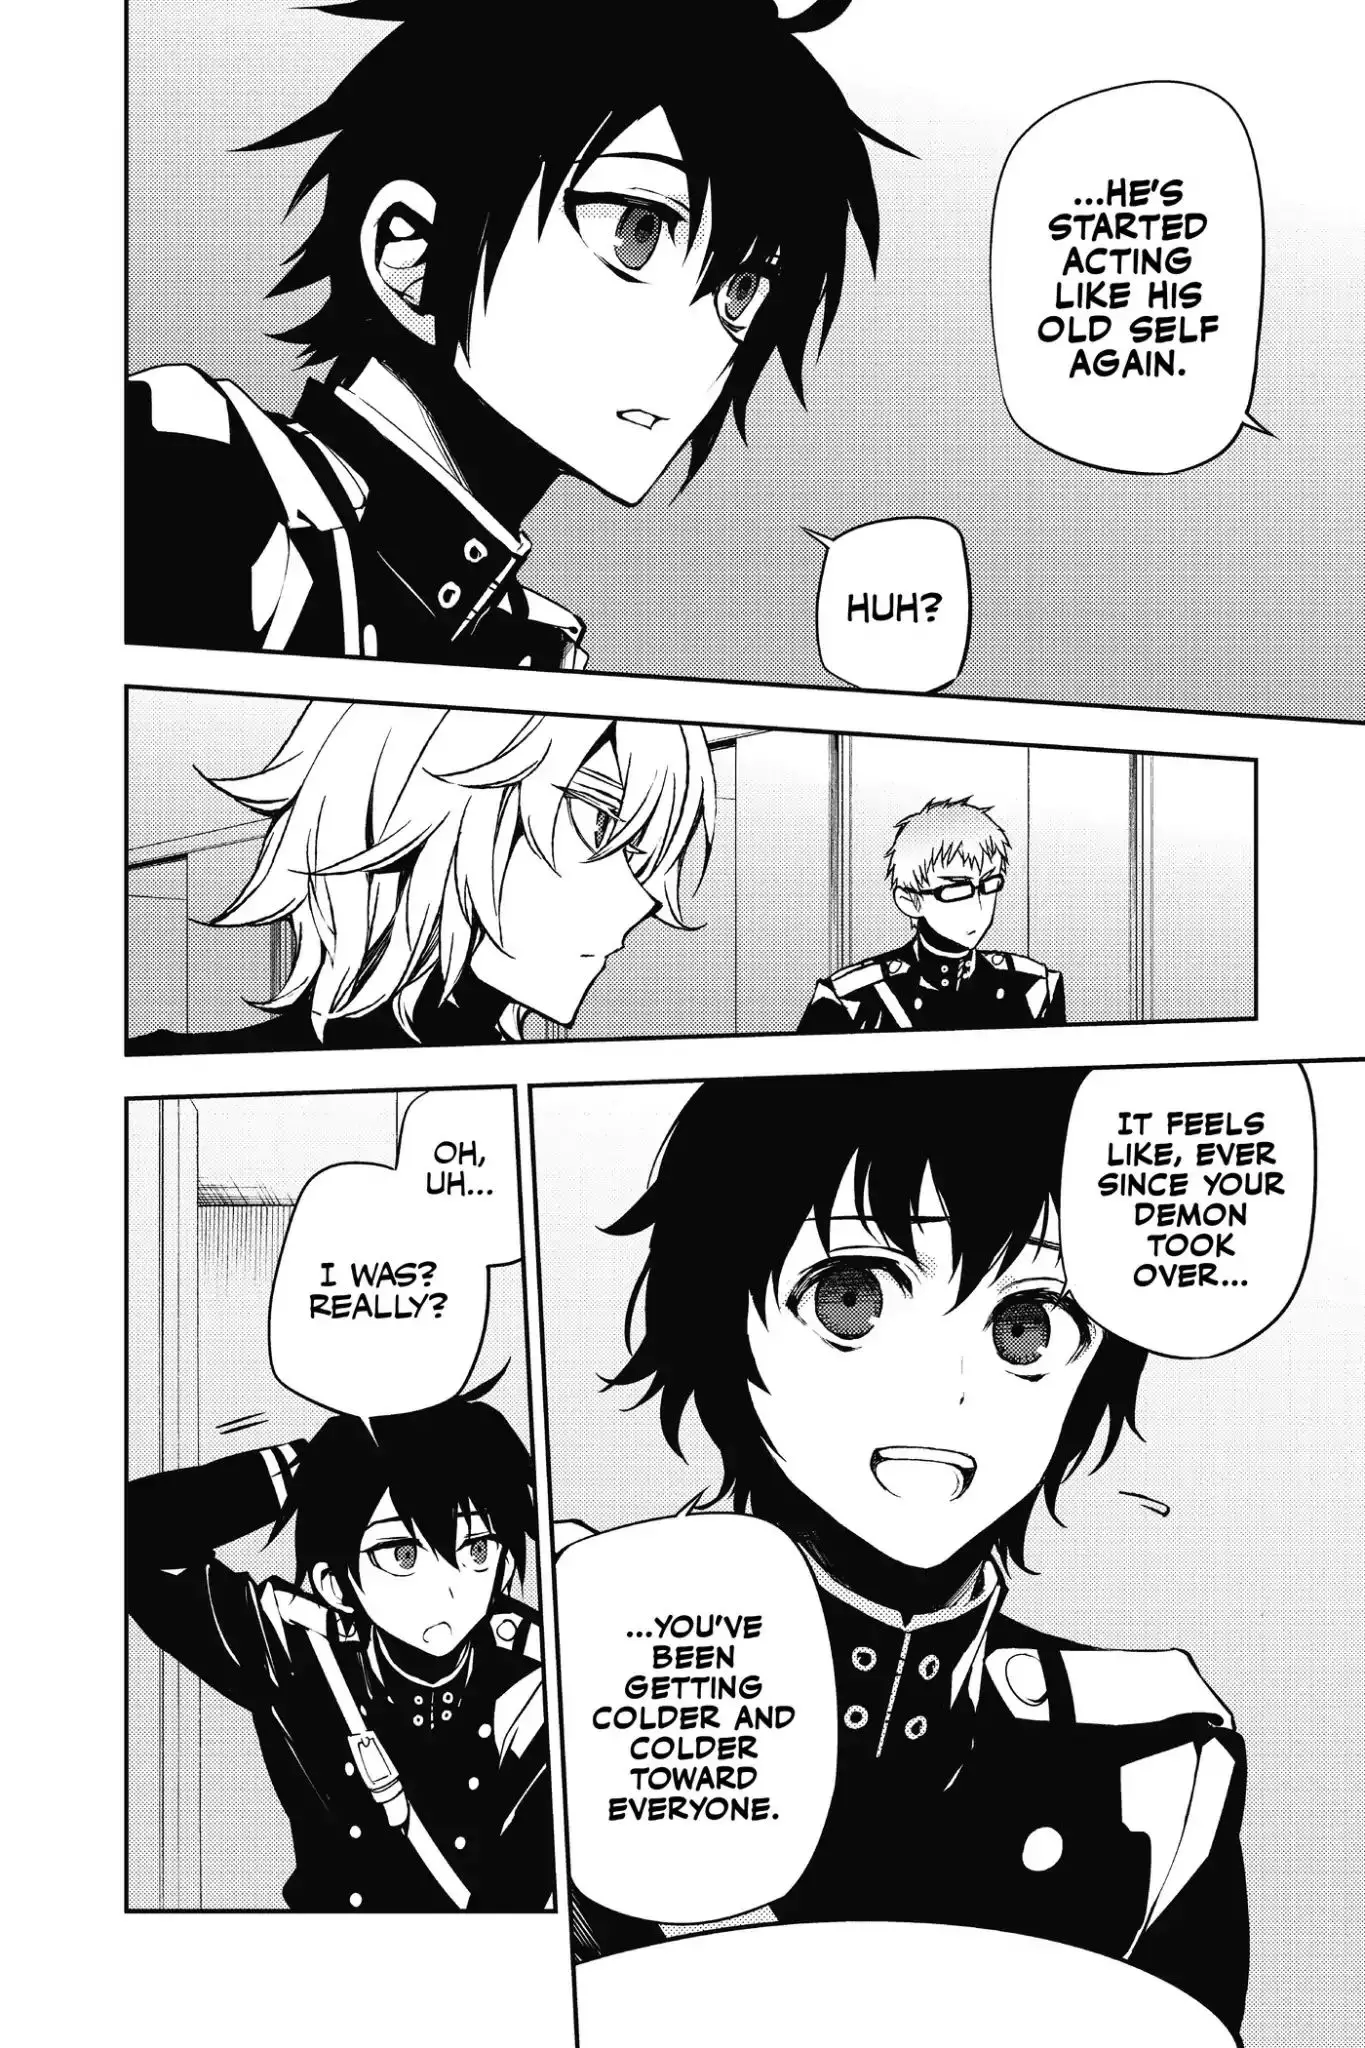 Seraph Of The End - 48 page 16-8c53b5b6